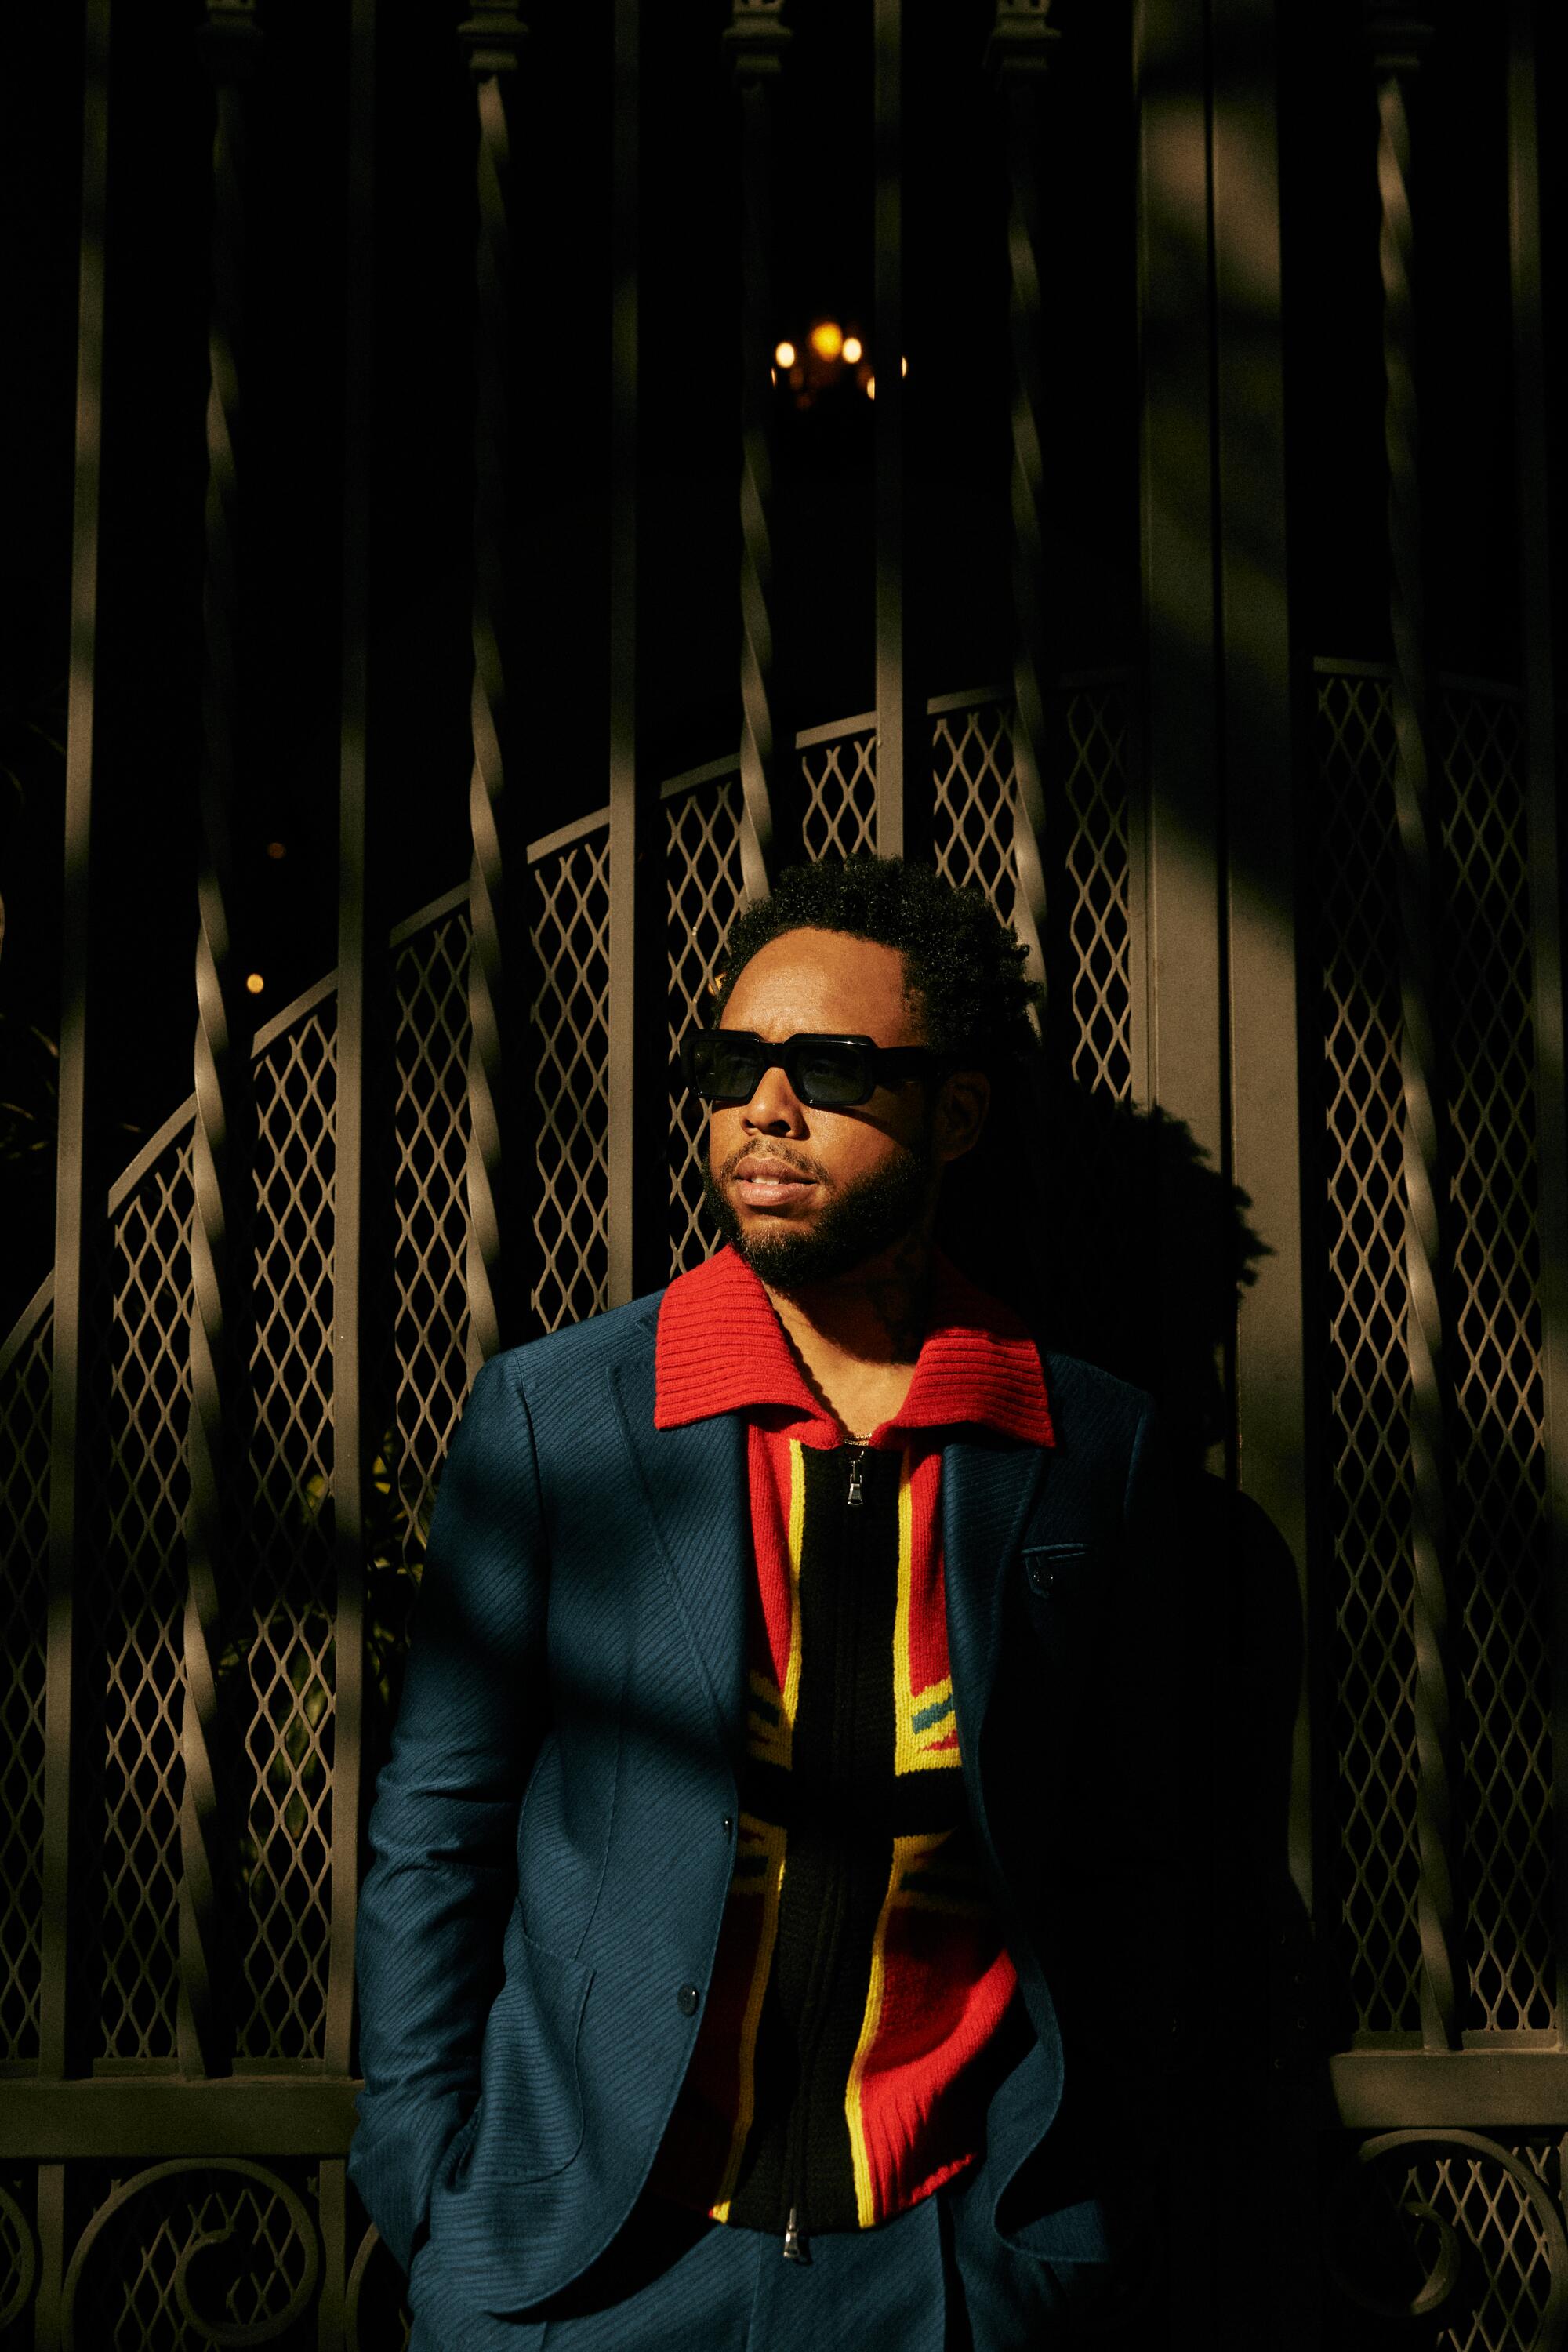 Terrace Martin stands against a wrought iron fence in a mix of shadow and sun.